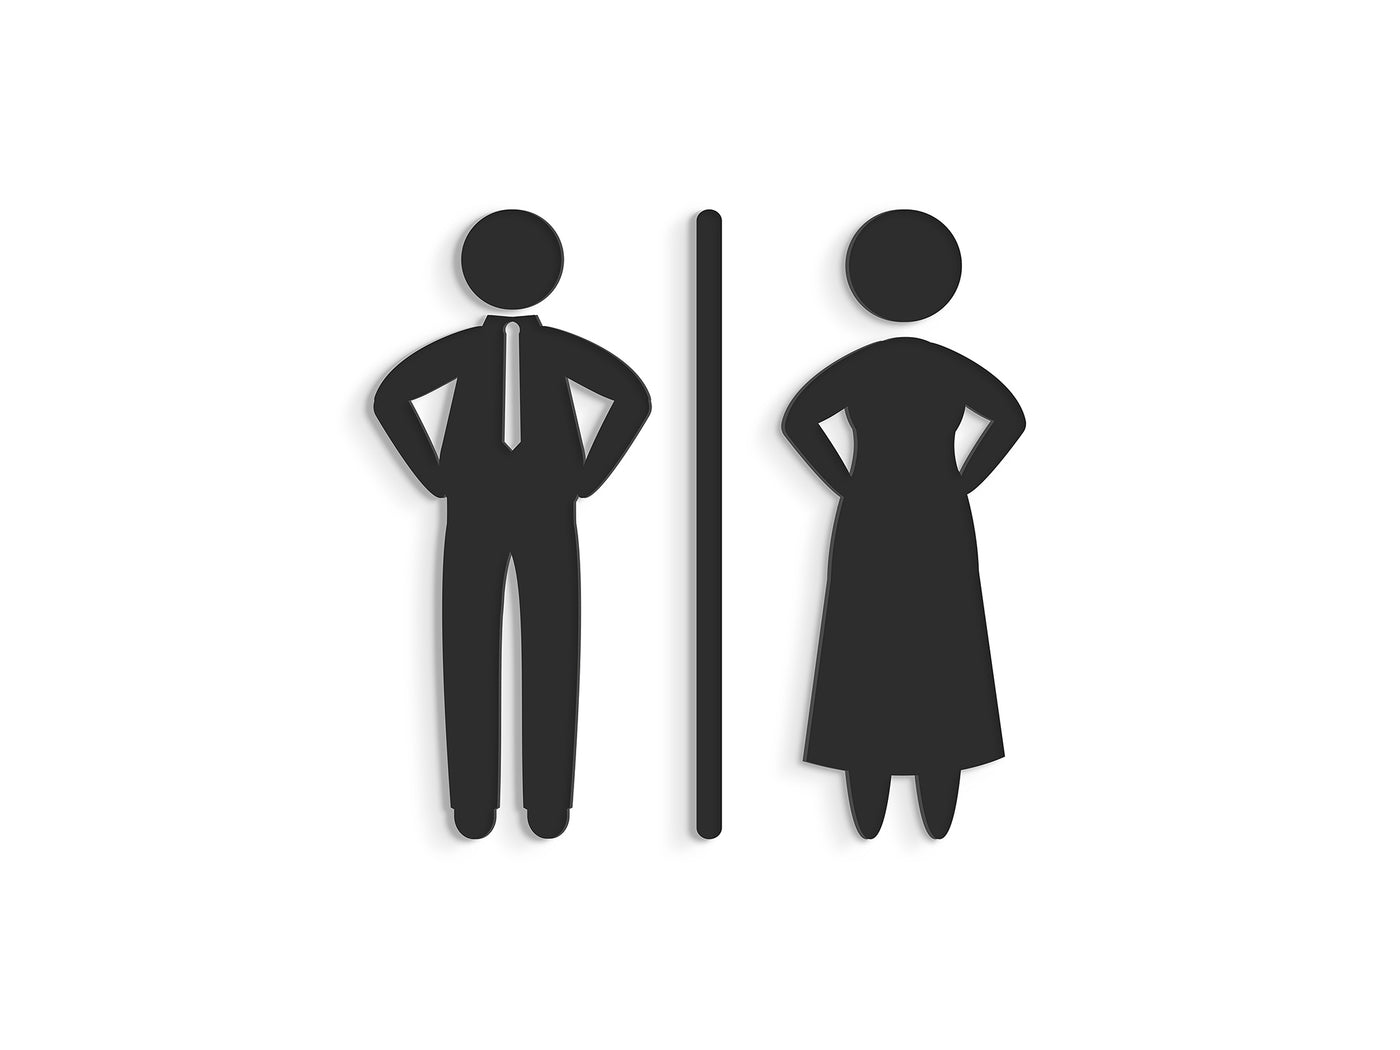 Formal, Set 2x - Embossed Adhesive Symbols, Signage for Toilets -  Man, Woman restroom